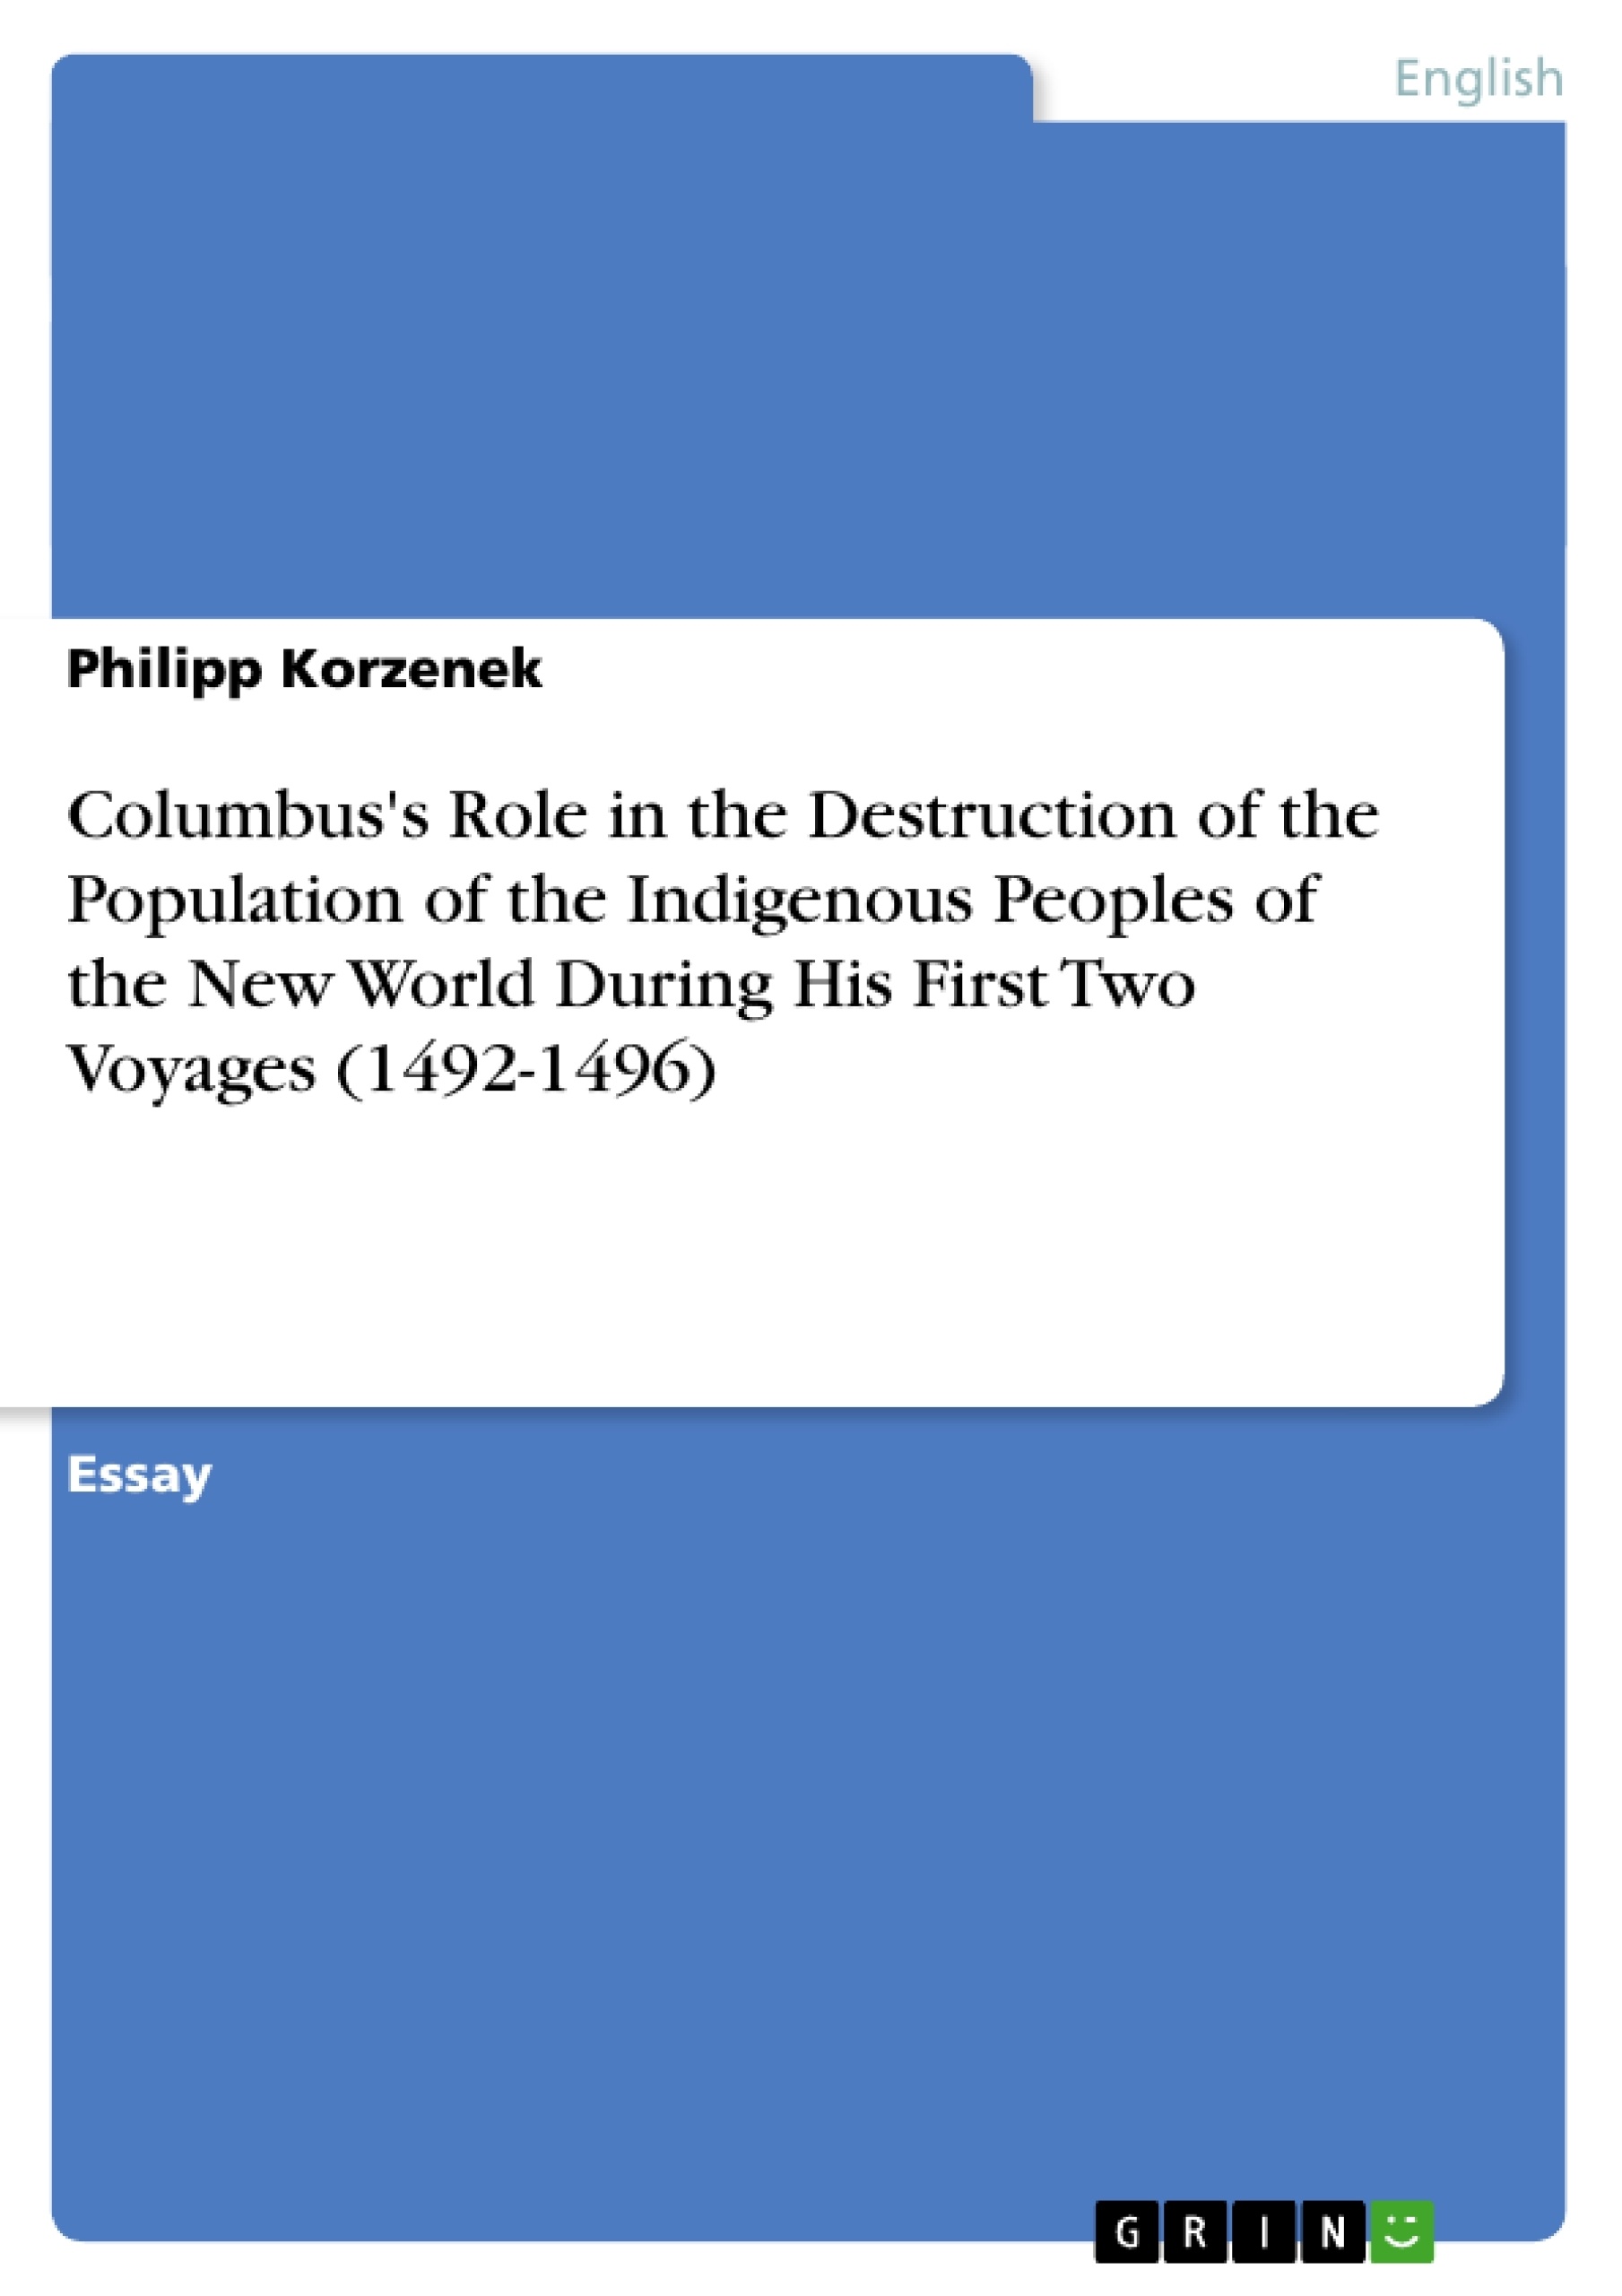 Titre: Columbus's Role in the Destruction of the Population of the Indigenous Peoples of the New World During His First Two Voyages (1492-1496)